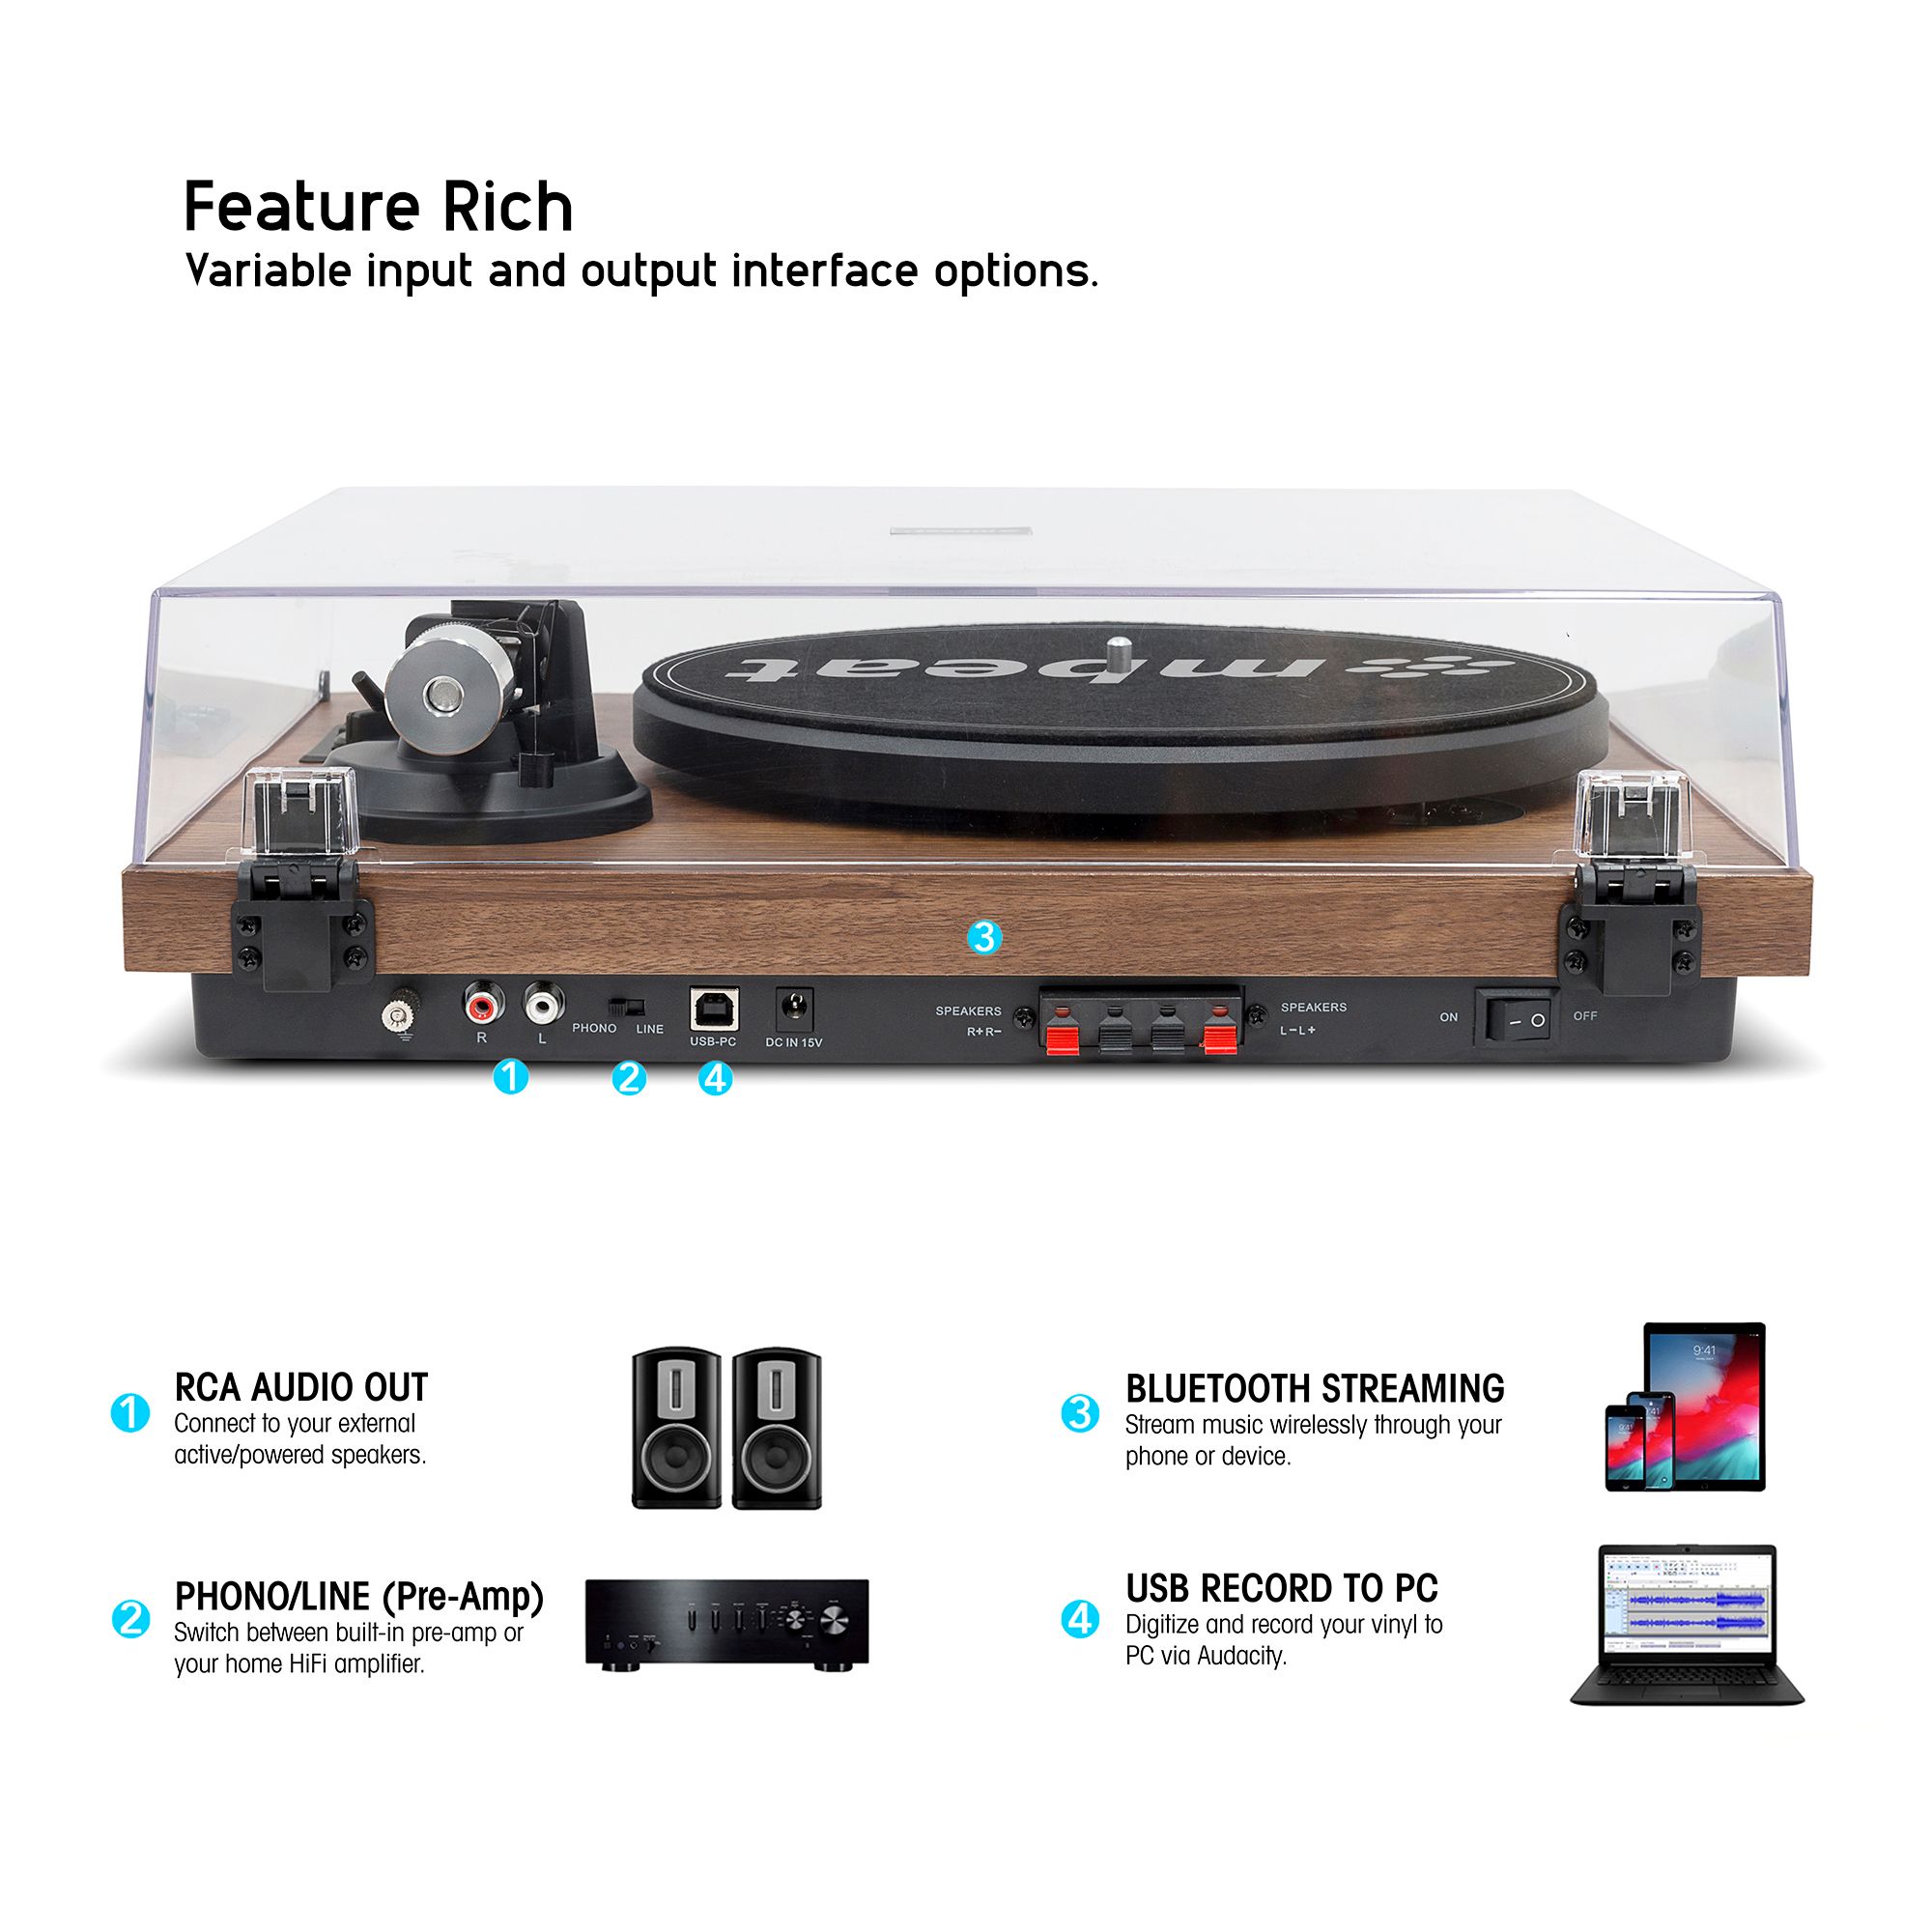 mbeat®HIFI Turntable with Speakers - Vinyl Turntable Record Player with 36W Bookshelf Speakers, 33/45 RPM, Bluetooth Streaming via Smart Devices